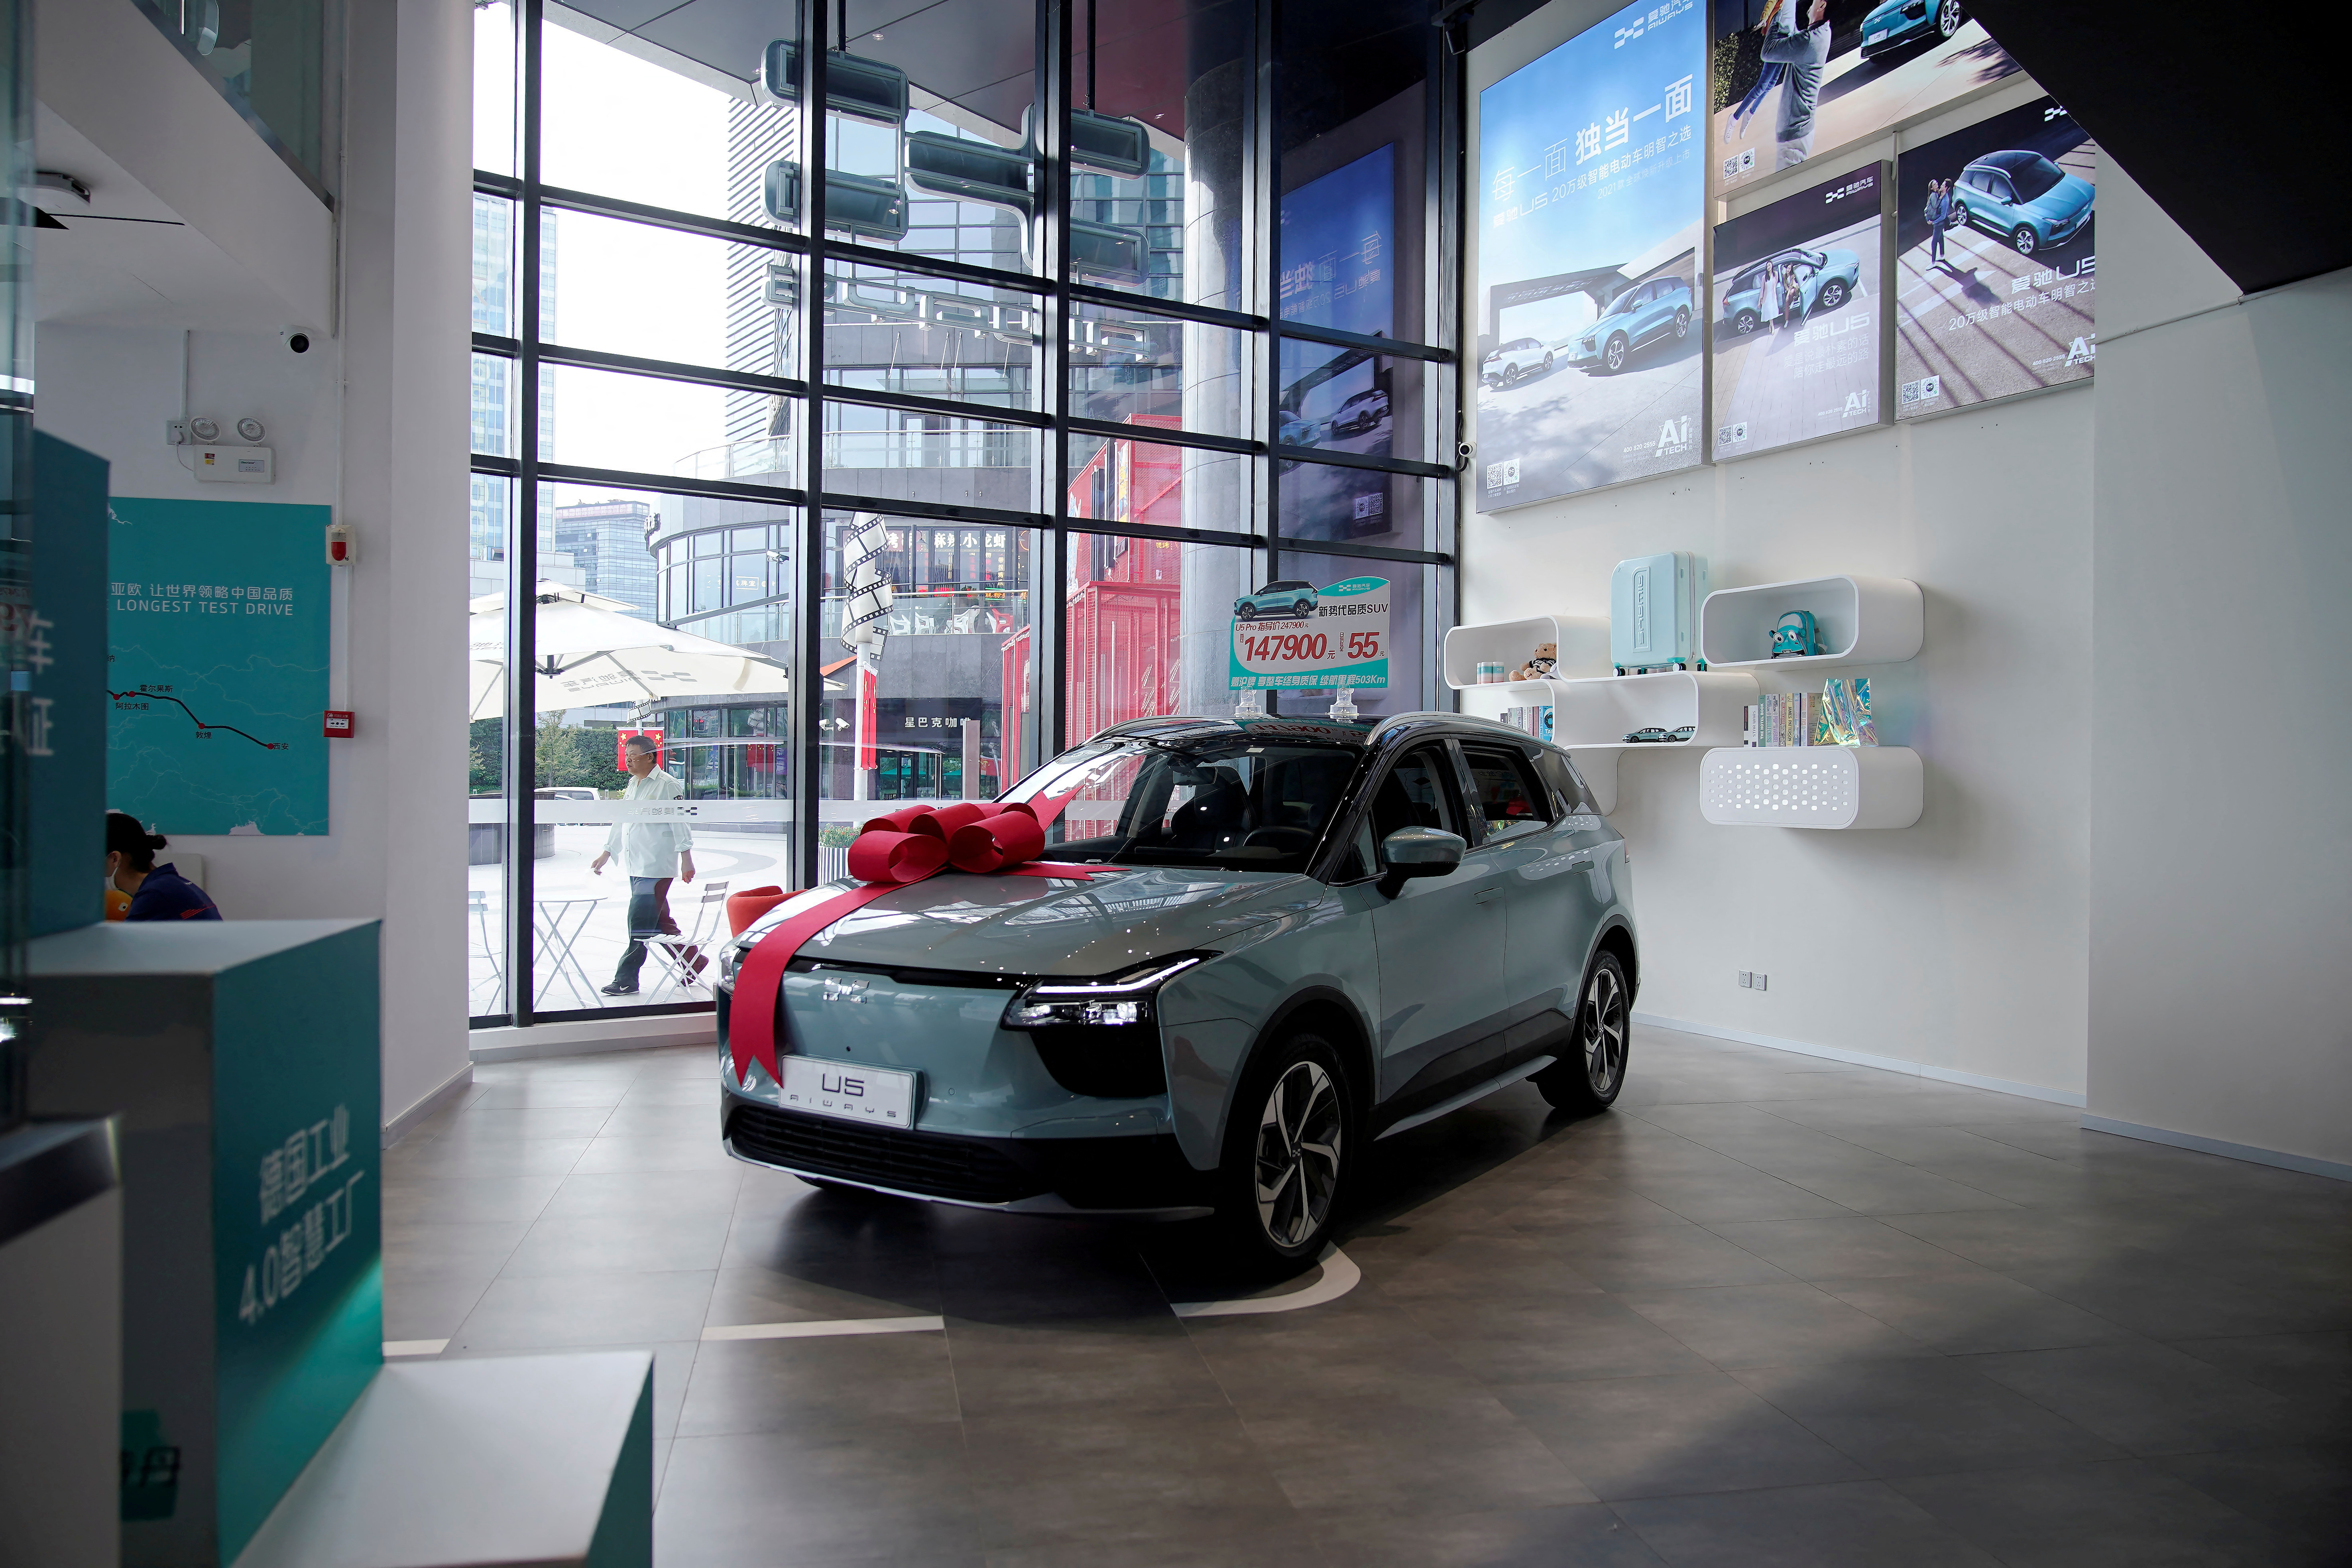 AIWAYS U5 electric car is displayed at company's store in Shanghai